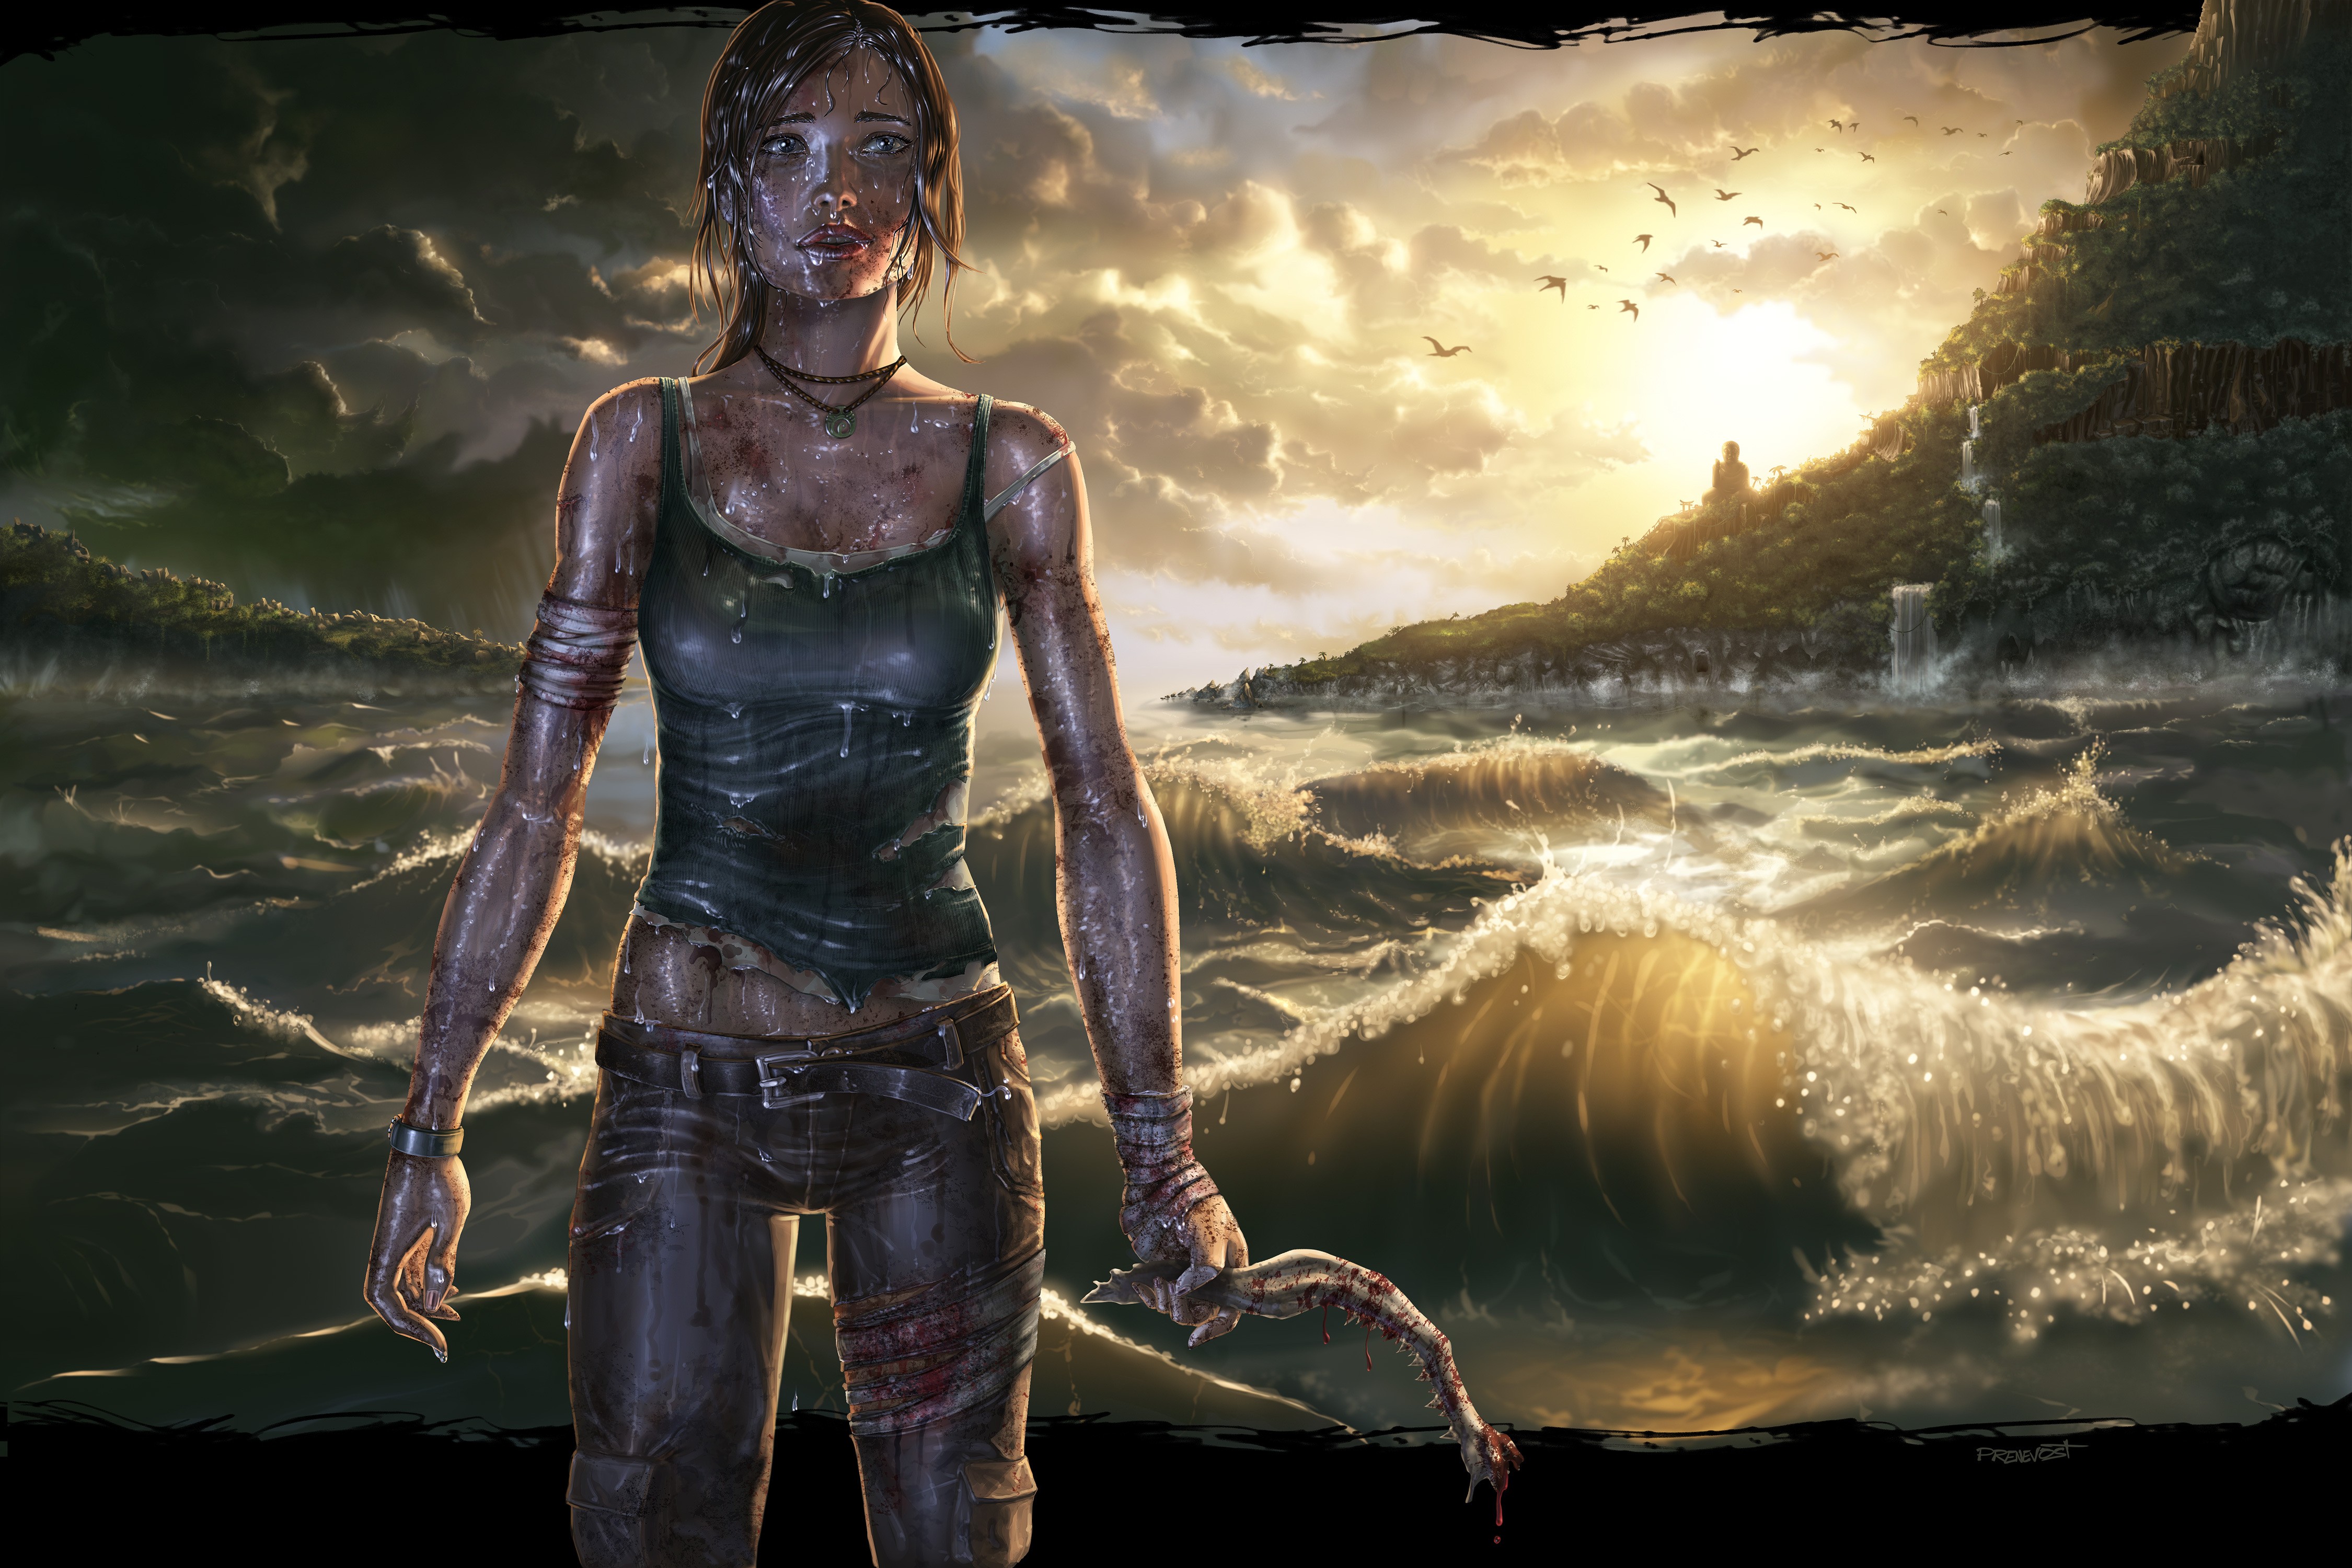 General 4500x3000 Tomb Raider artwork video games PC gaming blood video game characters video game girls wounds sea sunlight women necklace wet wet body video game art Lara Croft (Tomb Raider) fan art